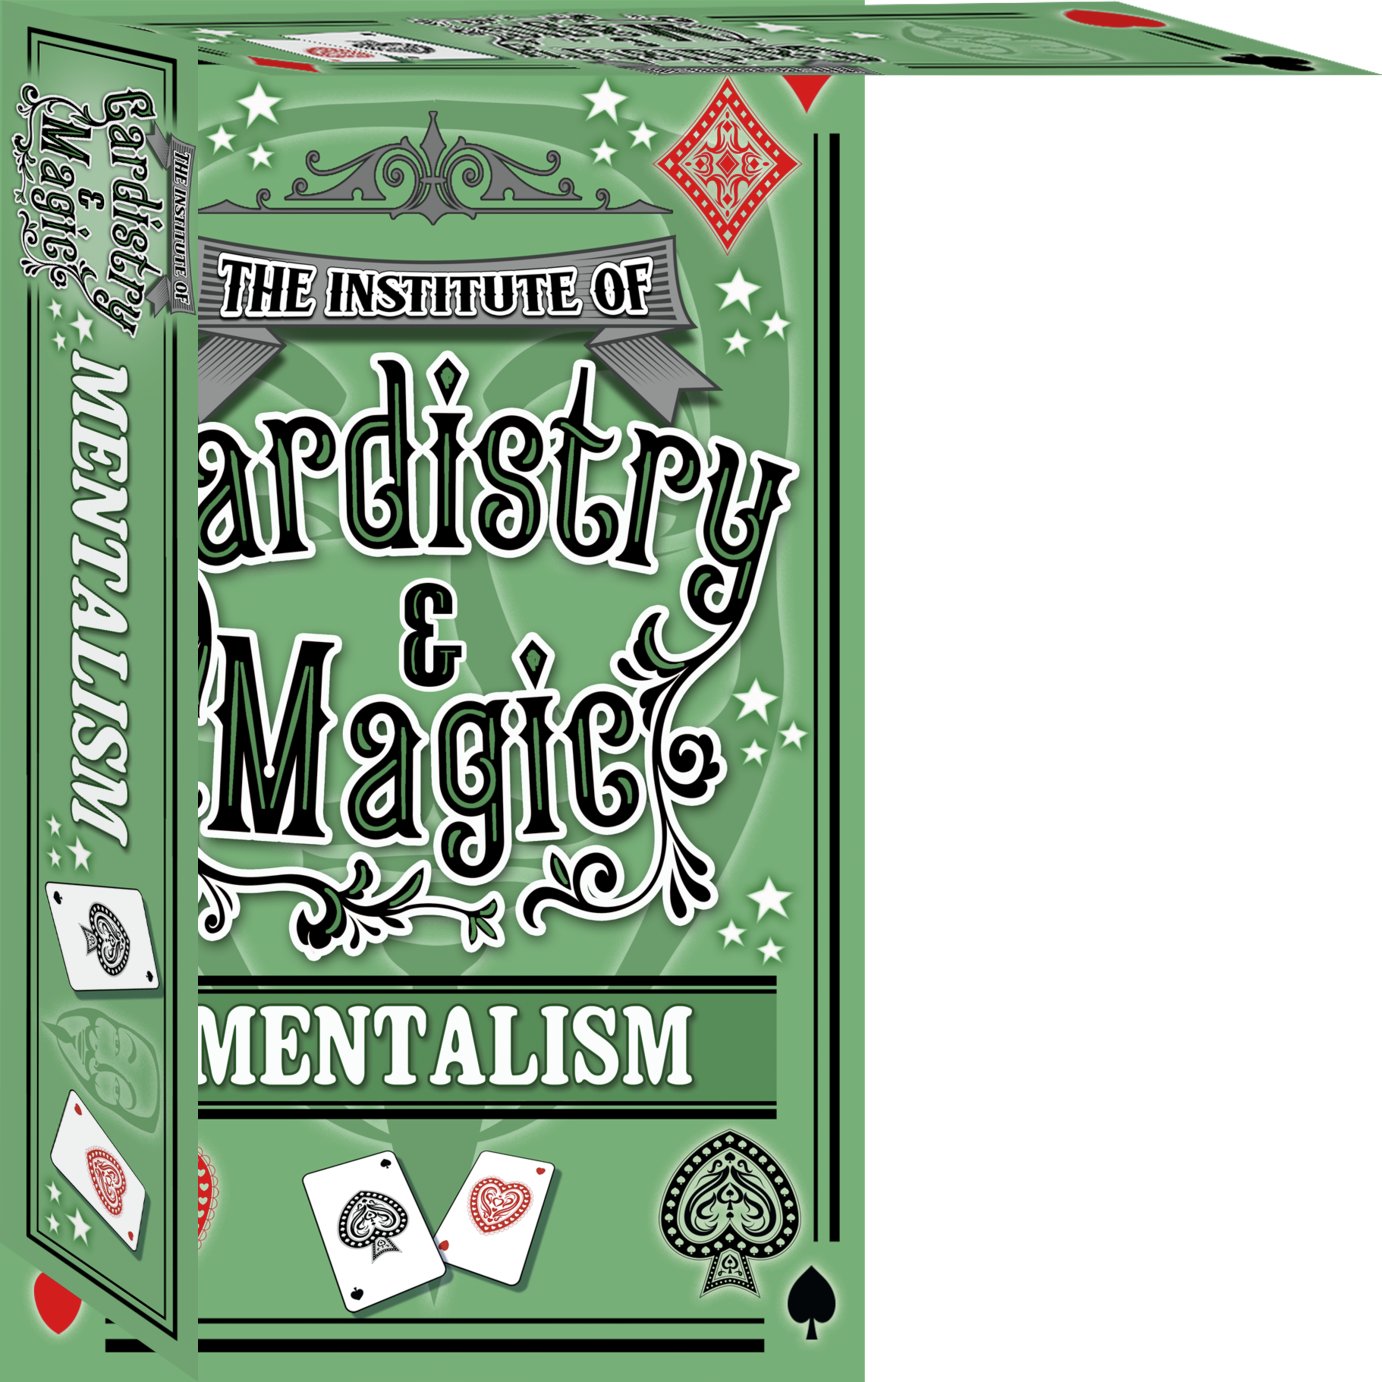 The Institute of Cardistry & Magic Mentalism Set Review